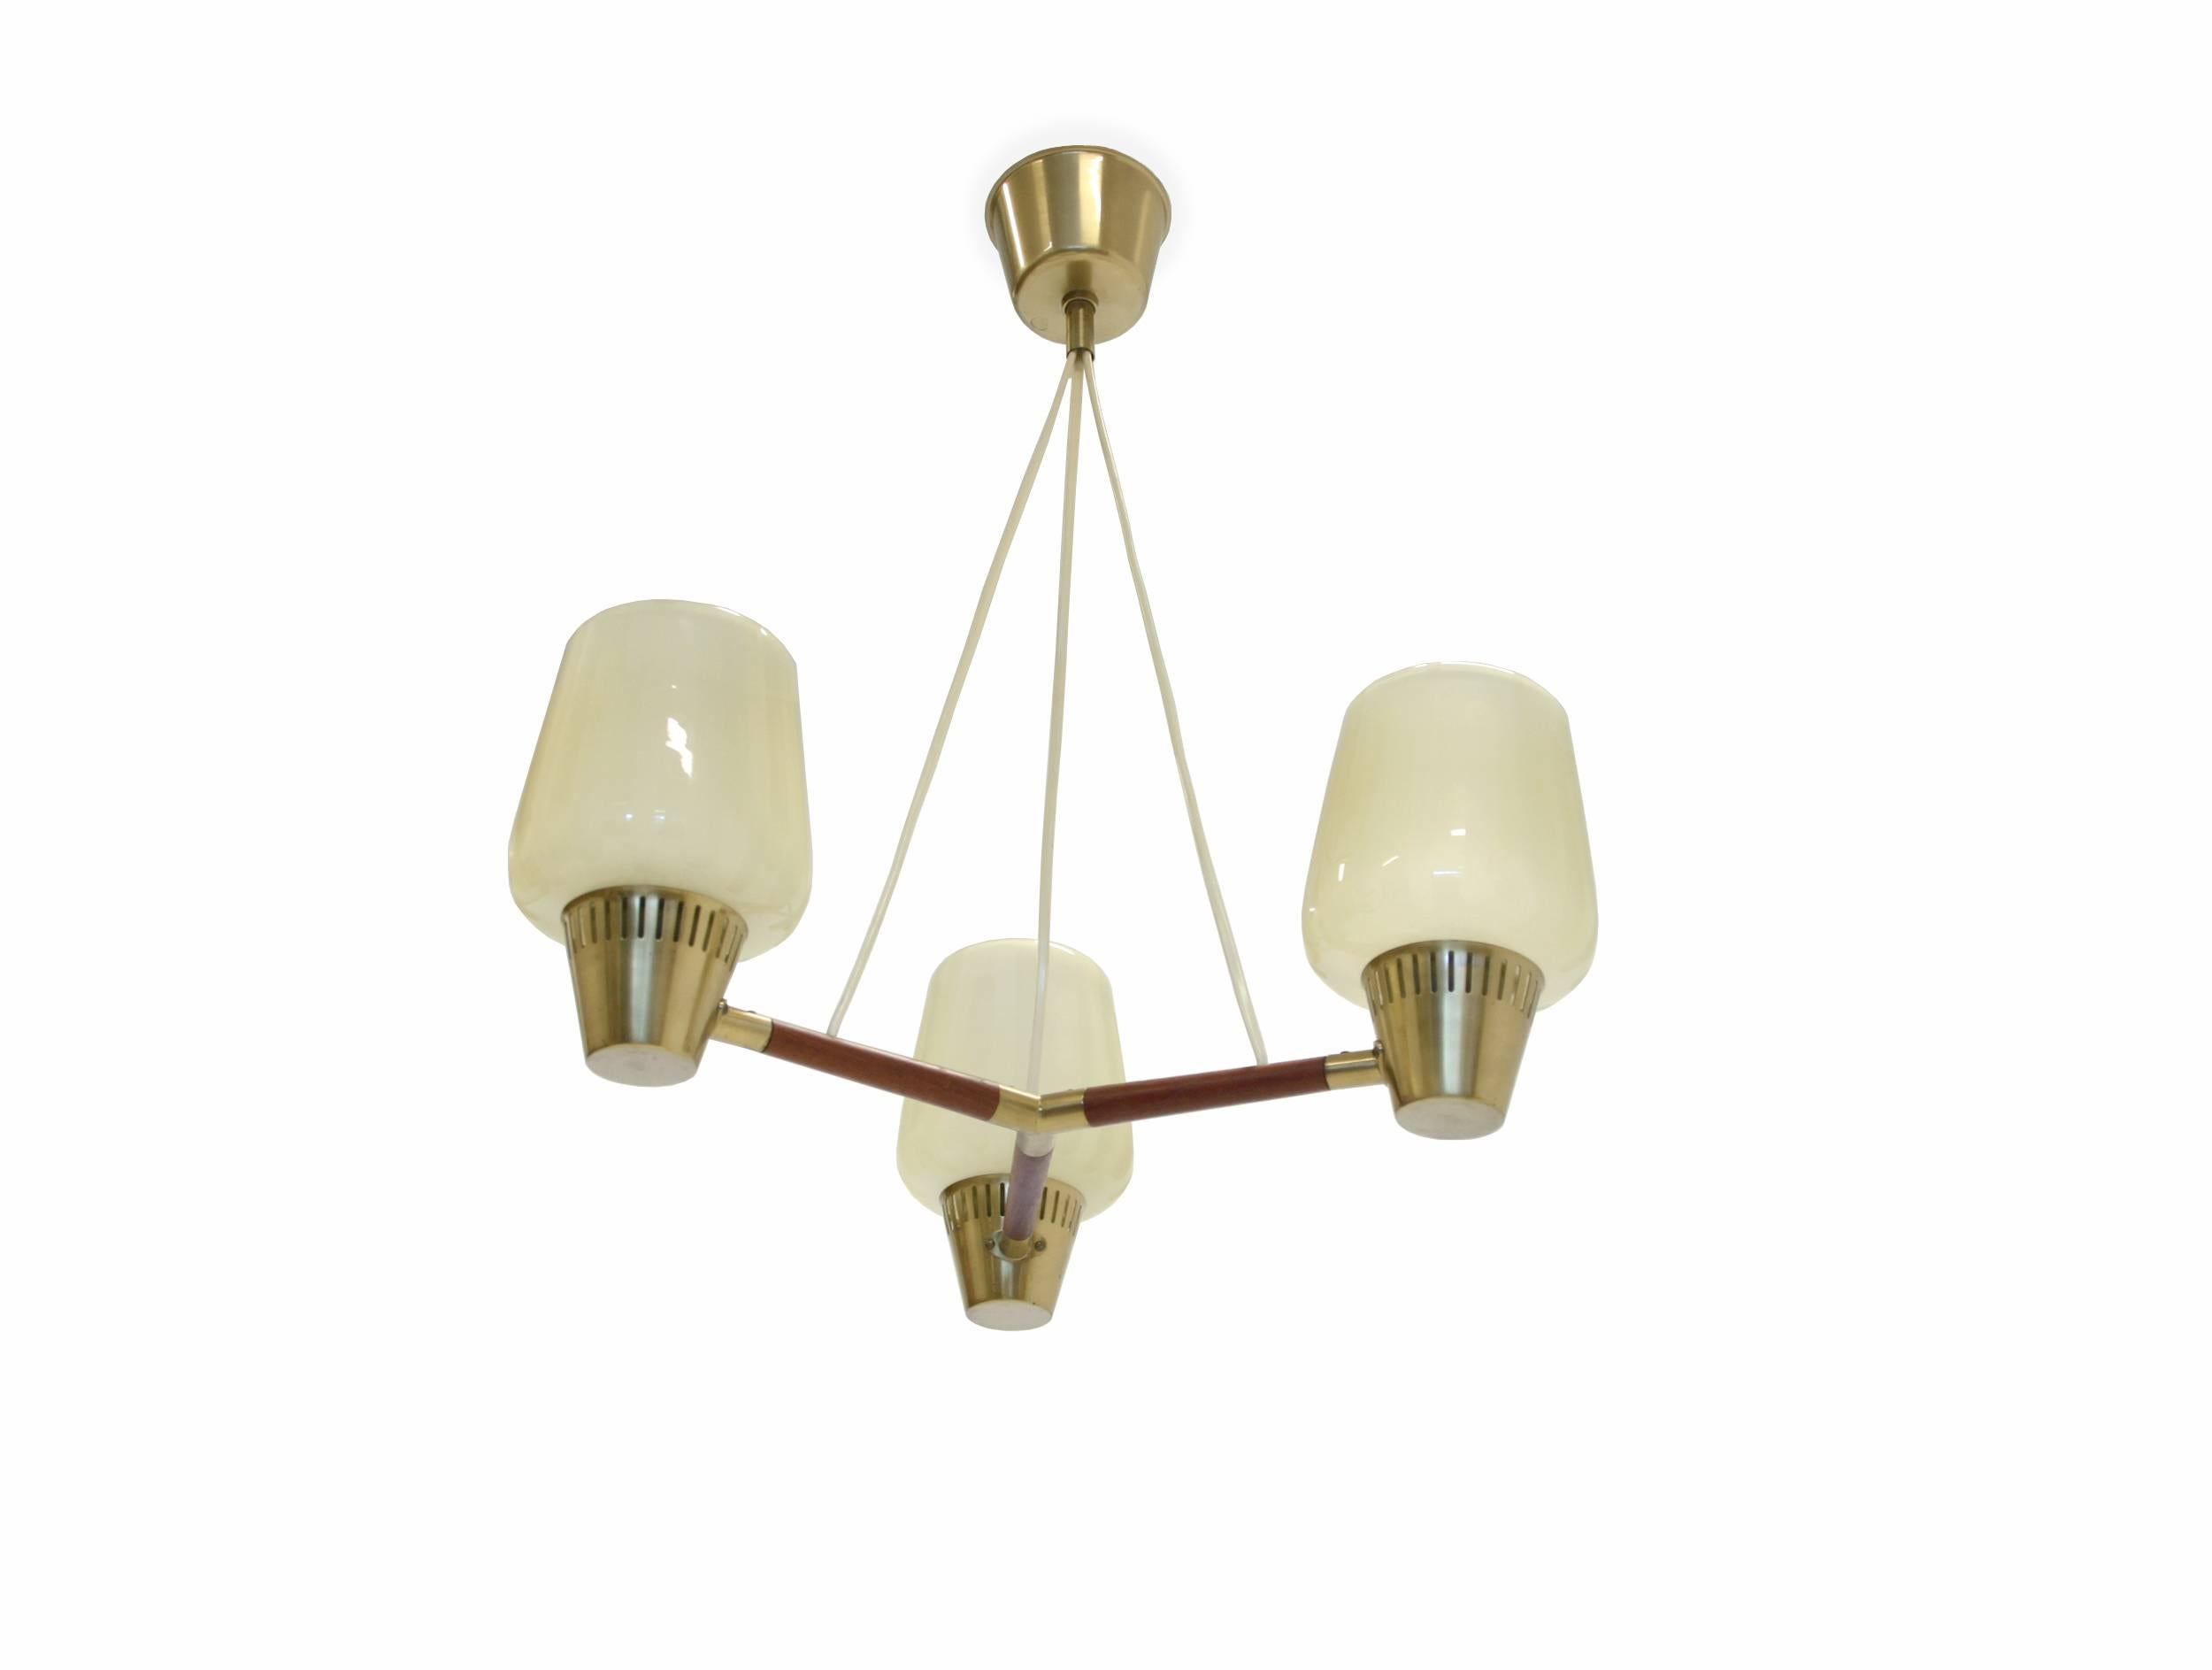 Wonderful and rare three-armed ceiling light on a teak frame with cupolas in glass. Designed and made in Sweden by ASEA, circa 1960s second half. The lamp is fully working and in very good vintage condition. The lamp is fitted with three E27 bulb